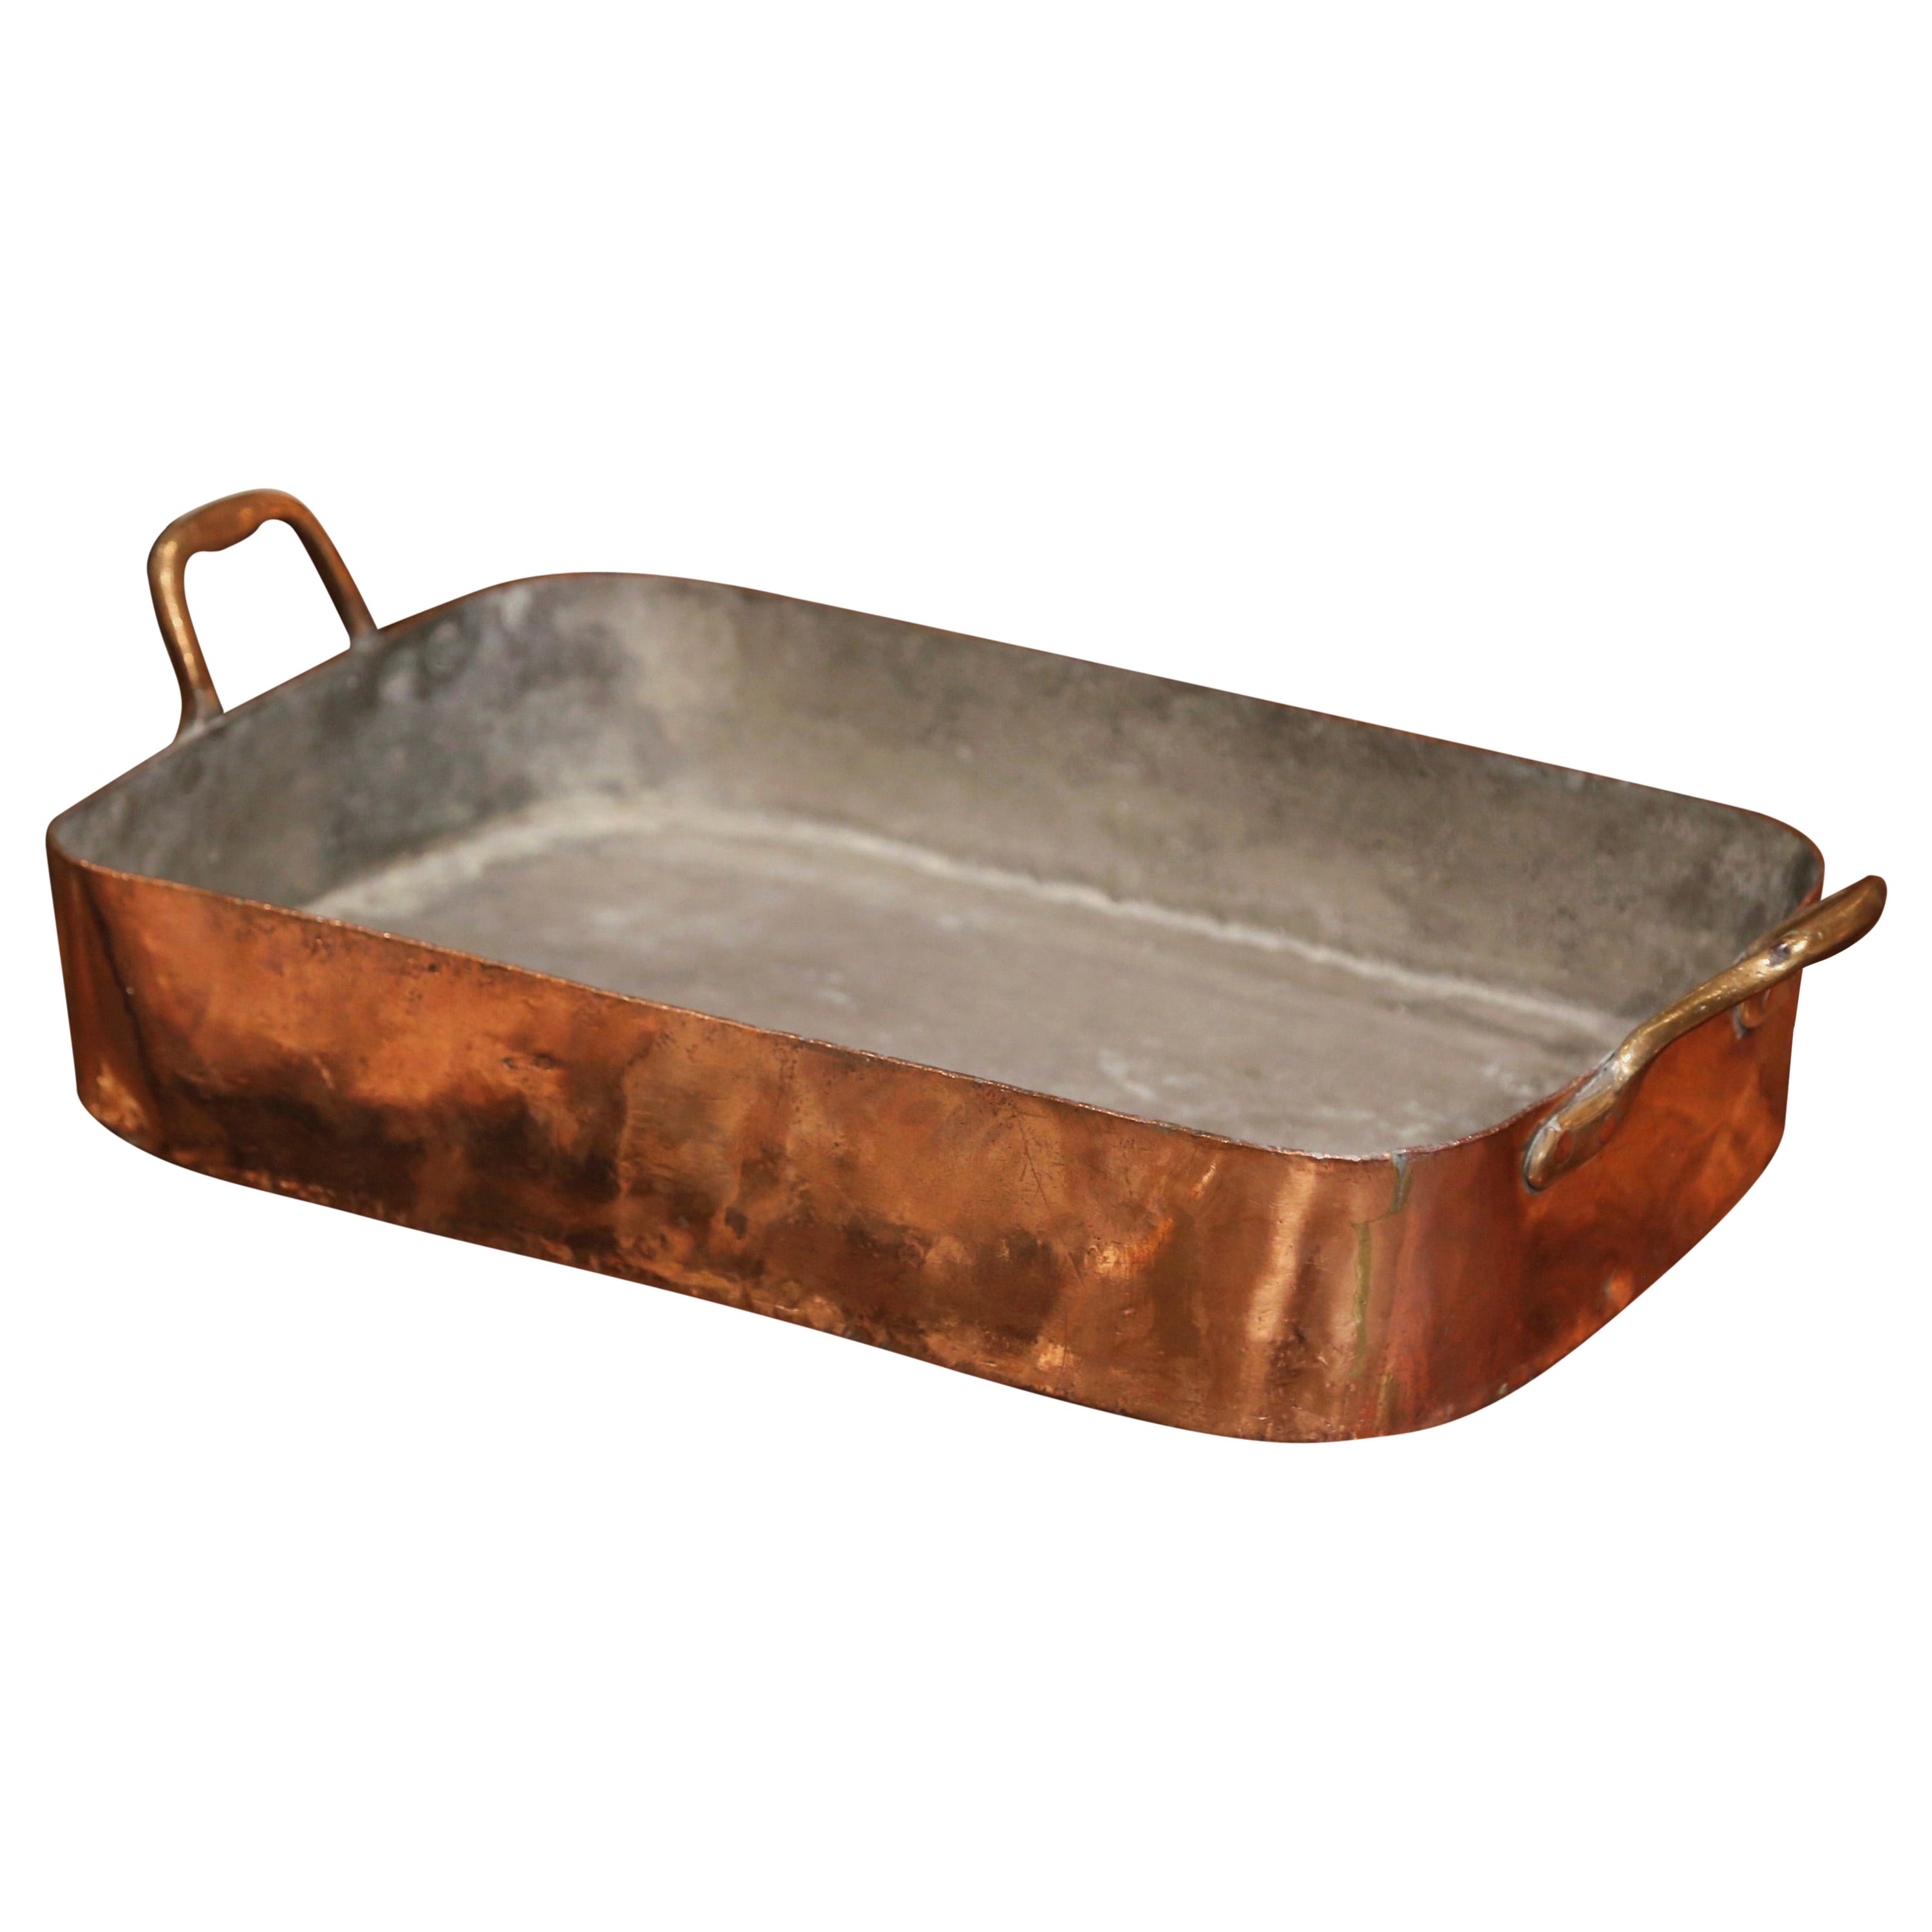 Mid-19th Century French Copper Kitchen Food Dish with Brass Handles